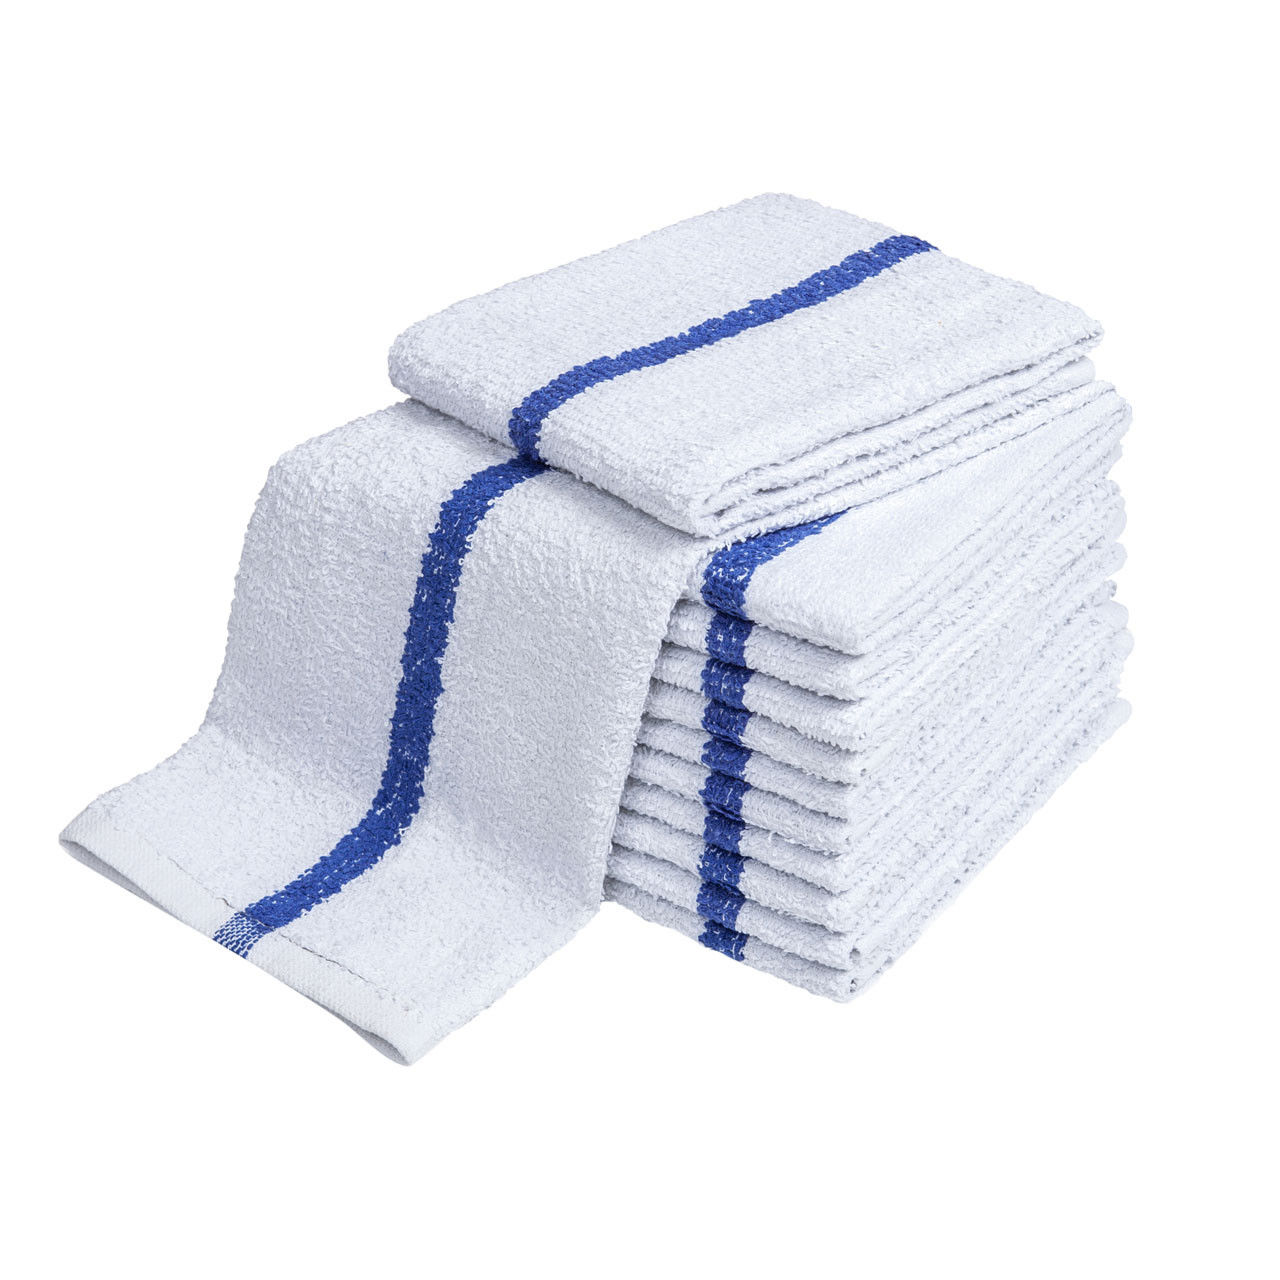 What are bar towels used for?